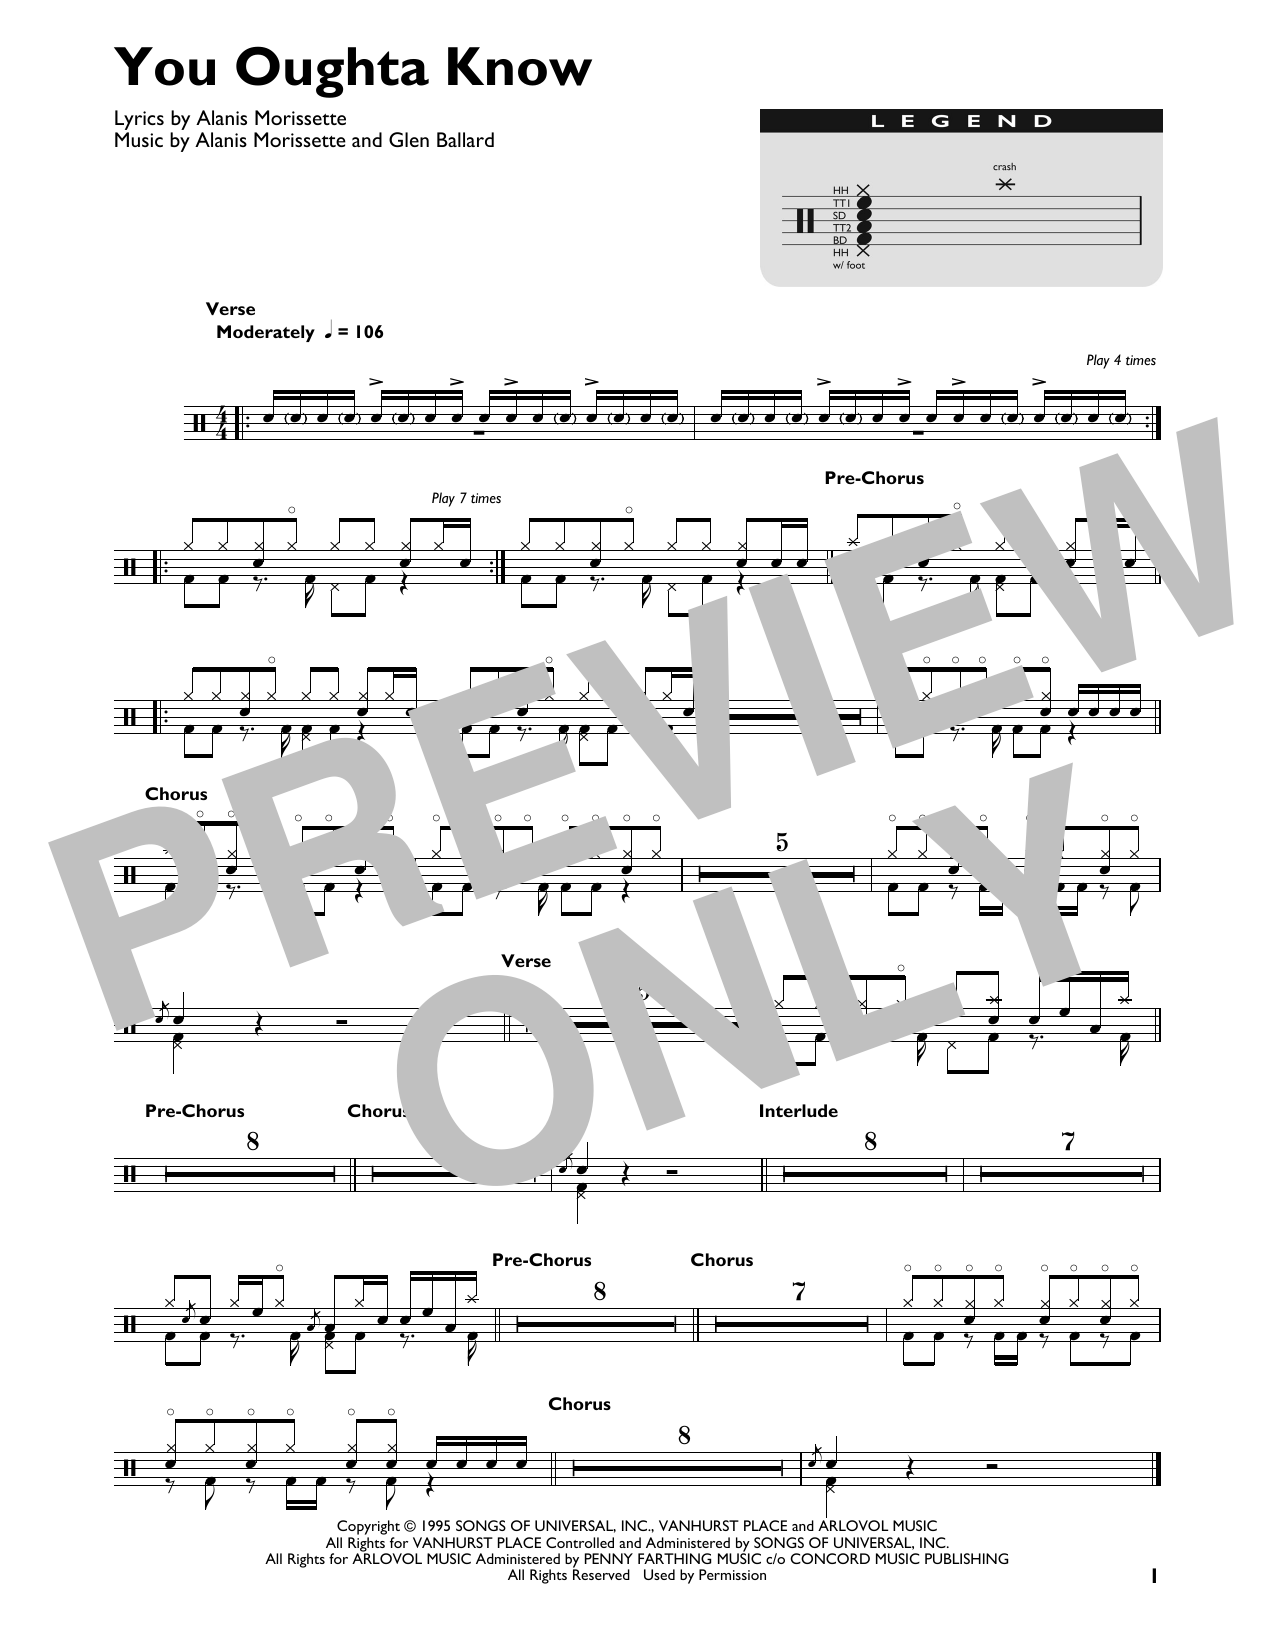 Download Alanis Morissette You Oughta Know Sheet Music